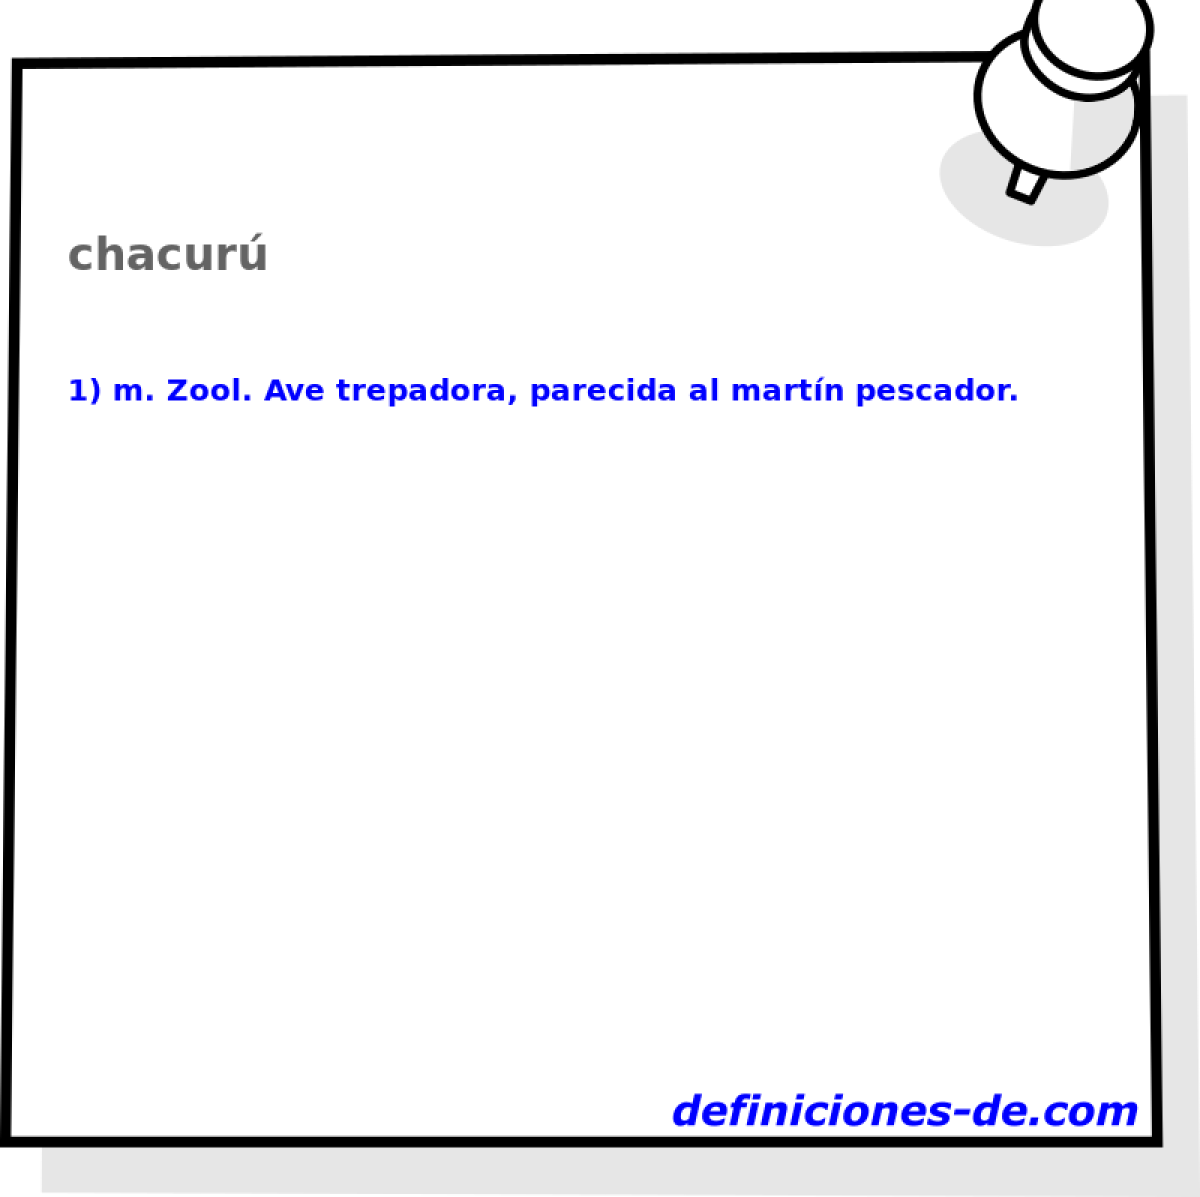 chacur 